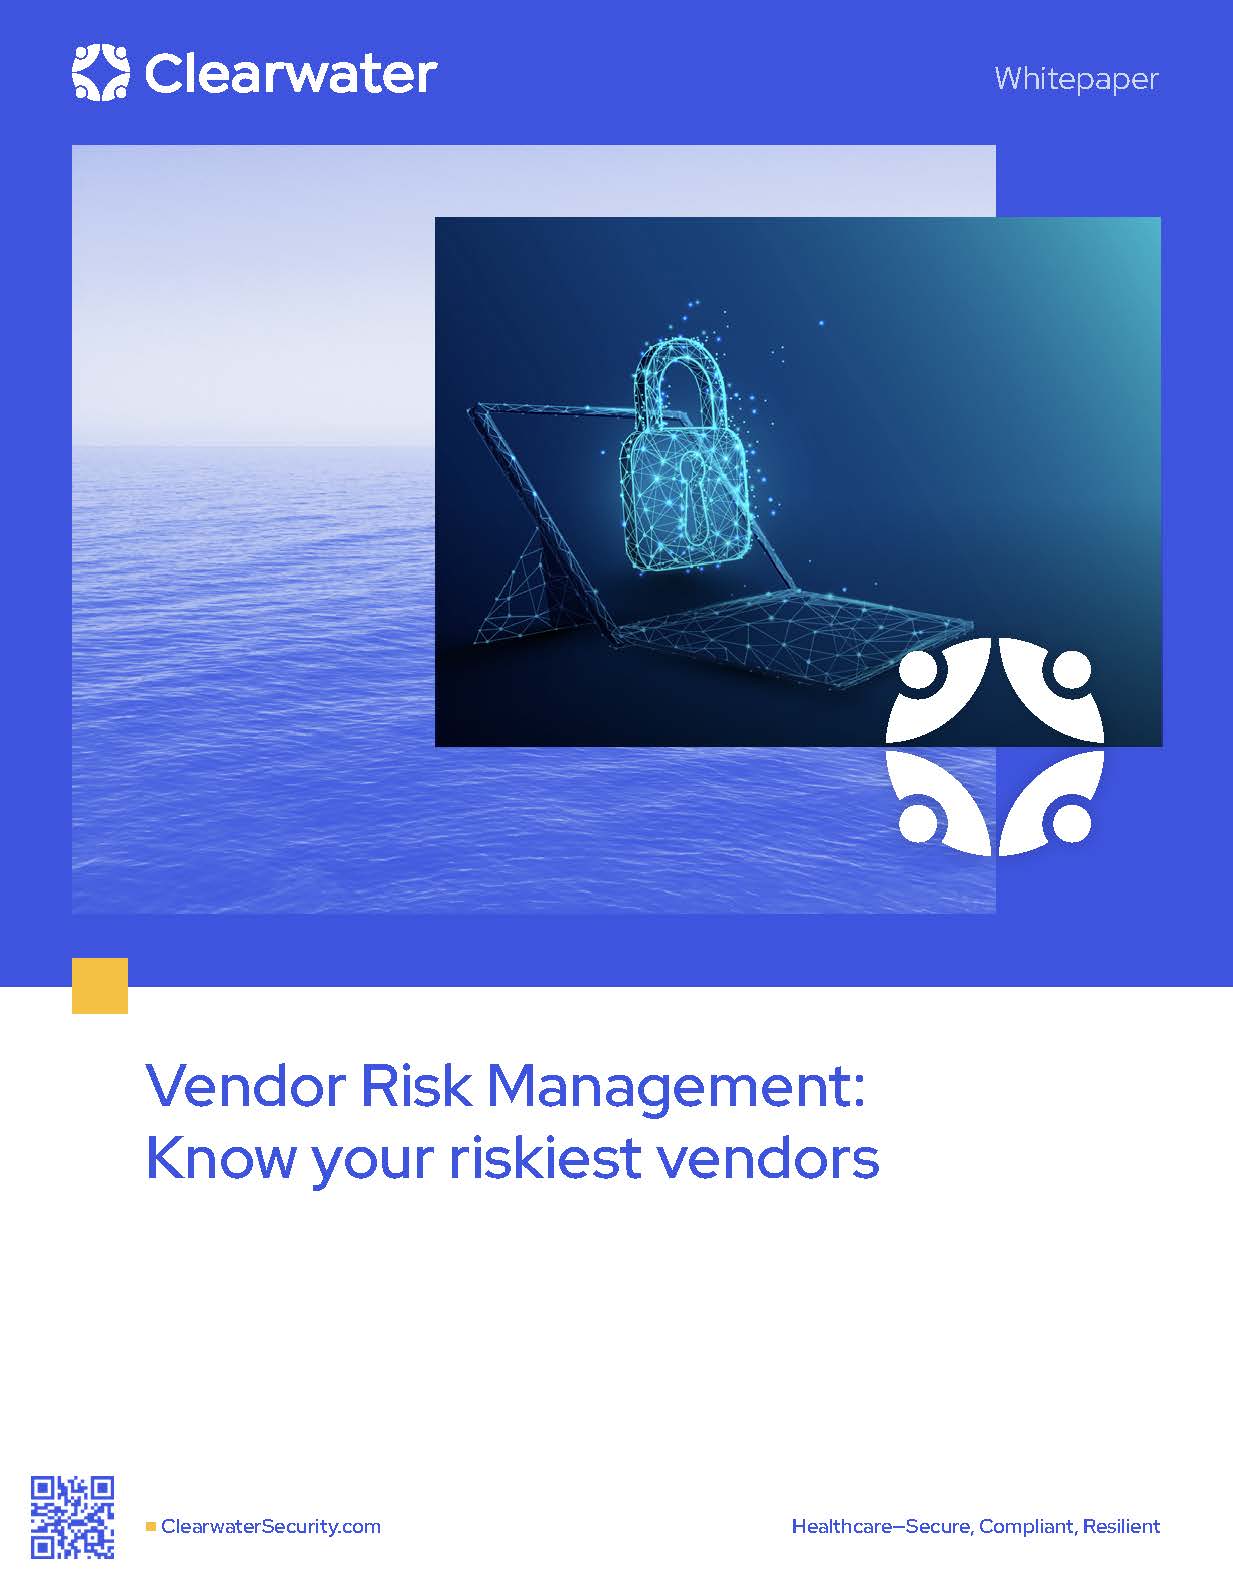 Vendor Risk Management - Know Your Riskiest Vendors by clearwater